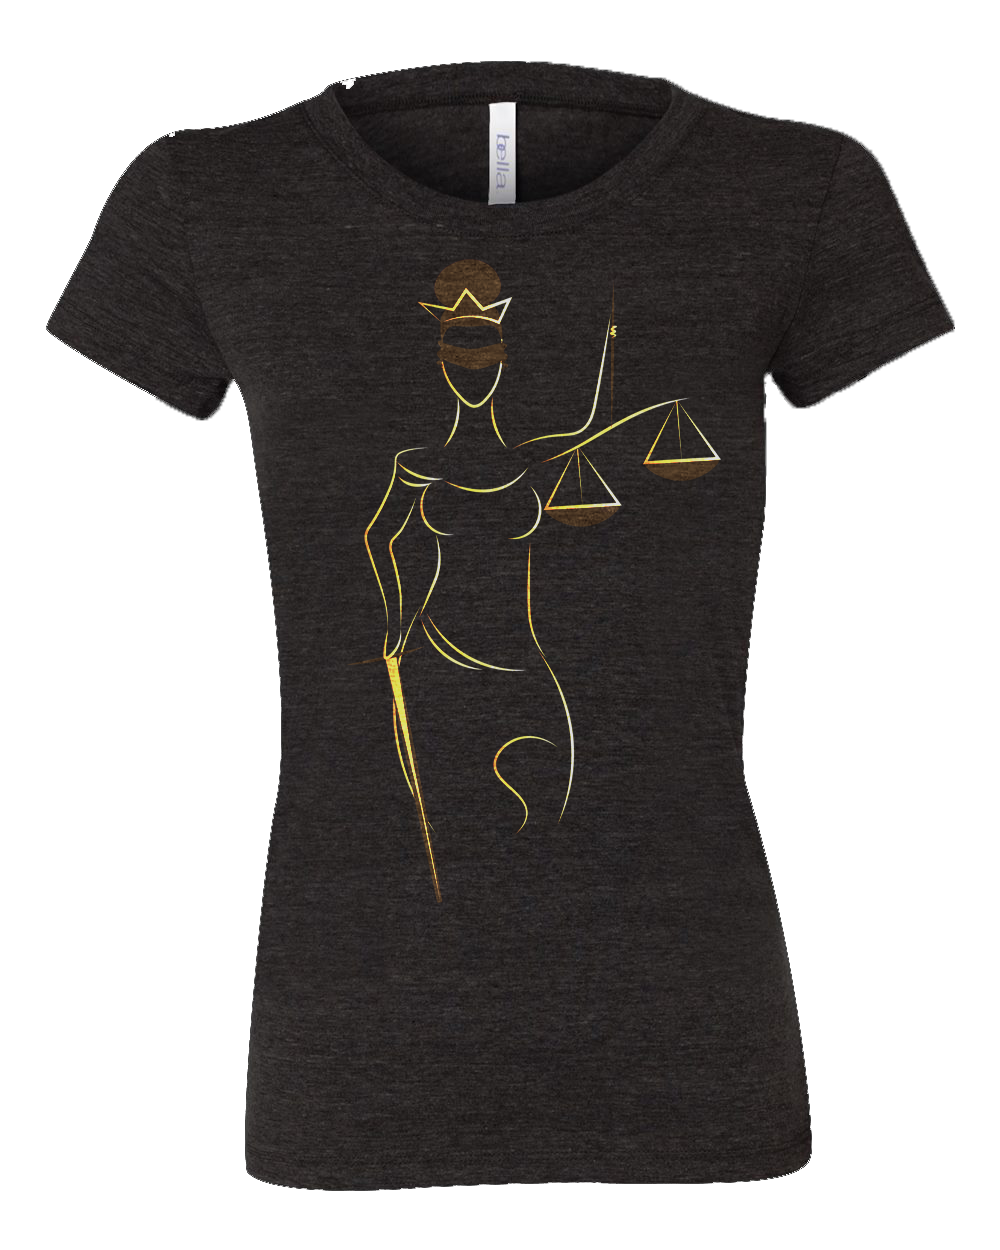 Double Sided Justice Tee - Char Black Front